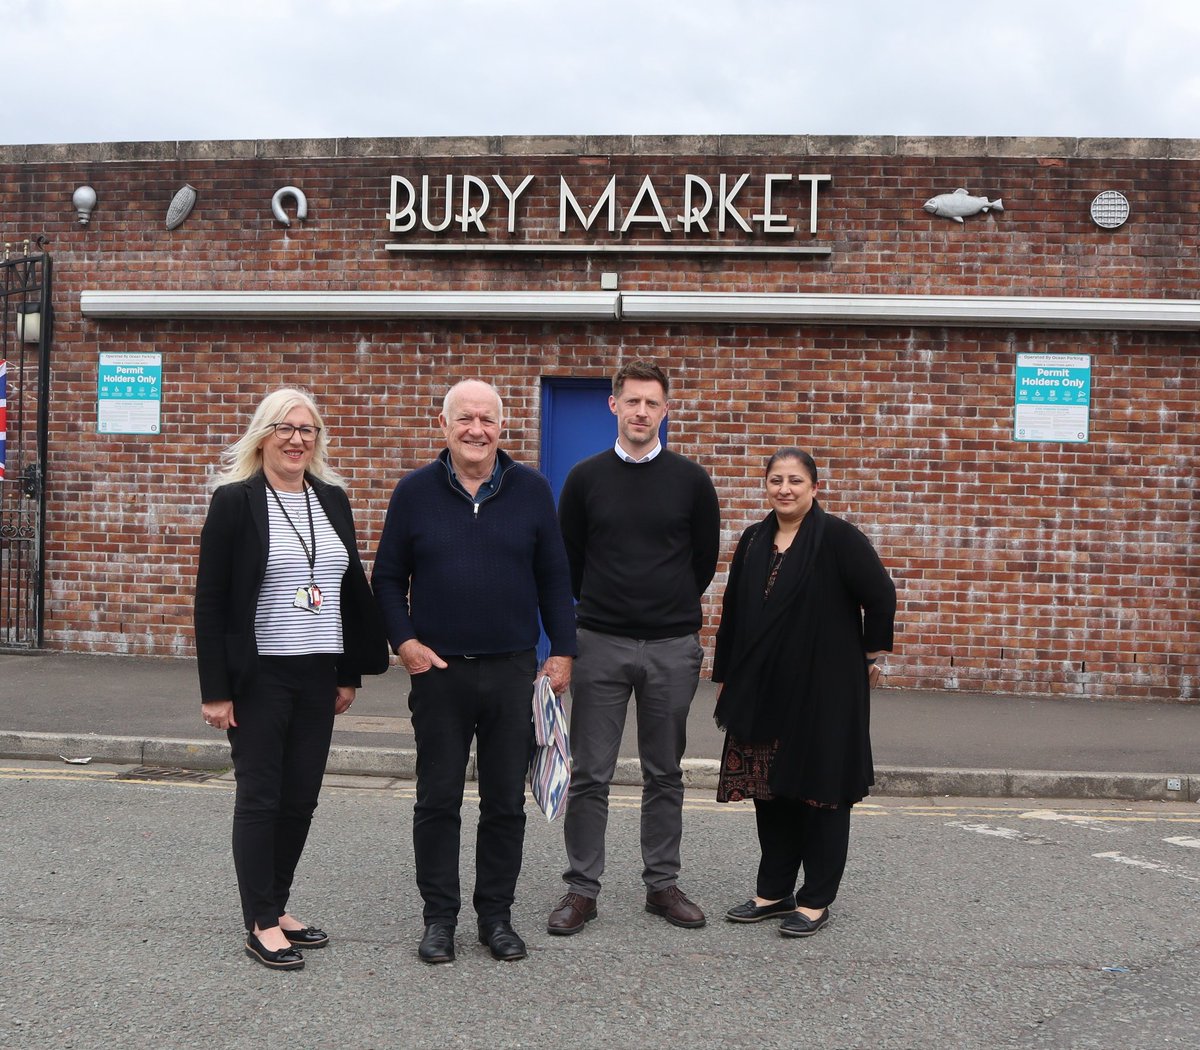 Legendary celebrity chef Rick Stein was at Bury Market on Saturday! 🙌

He tasted food from many of our amazing stalls, and even stopped for a pic with markets management!

You never know who is going to show up on market day! 🤷

#LYLM2023 #MyMarket